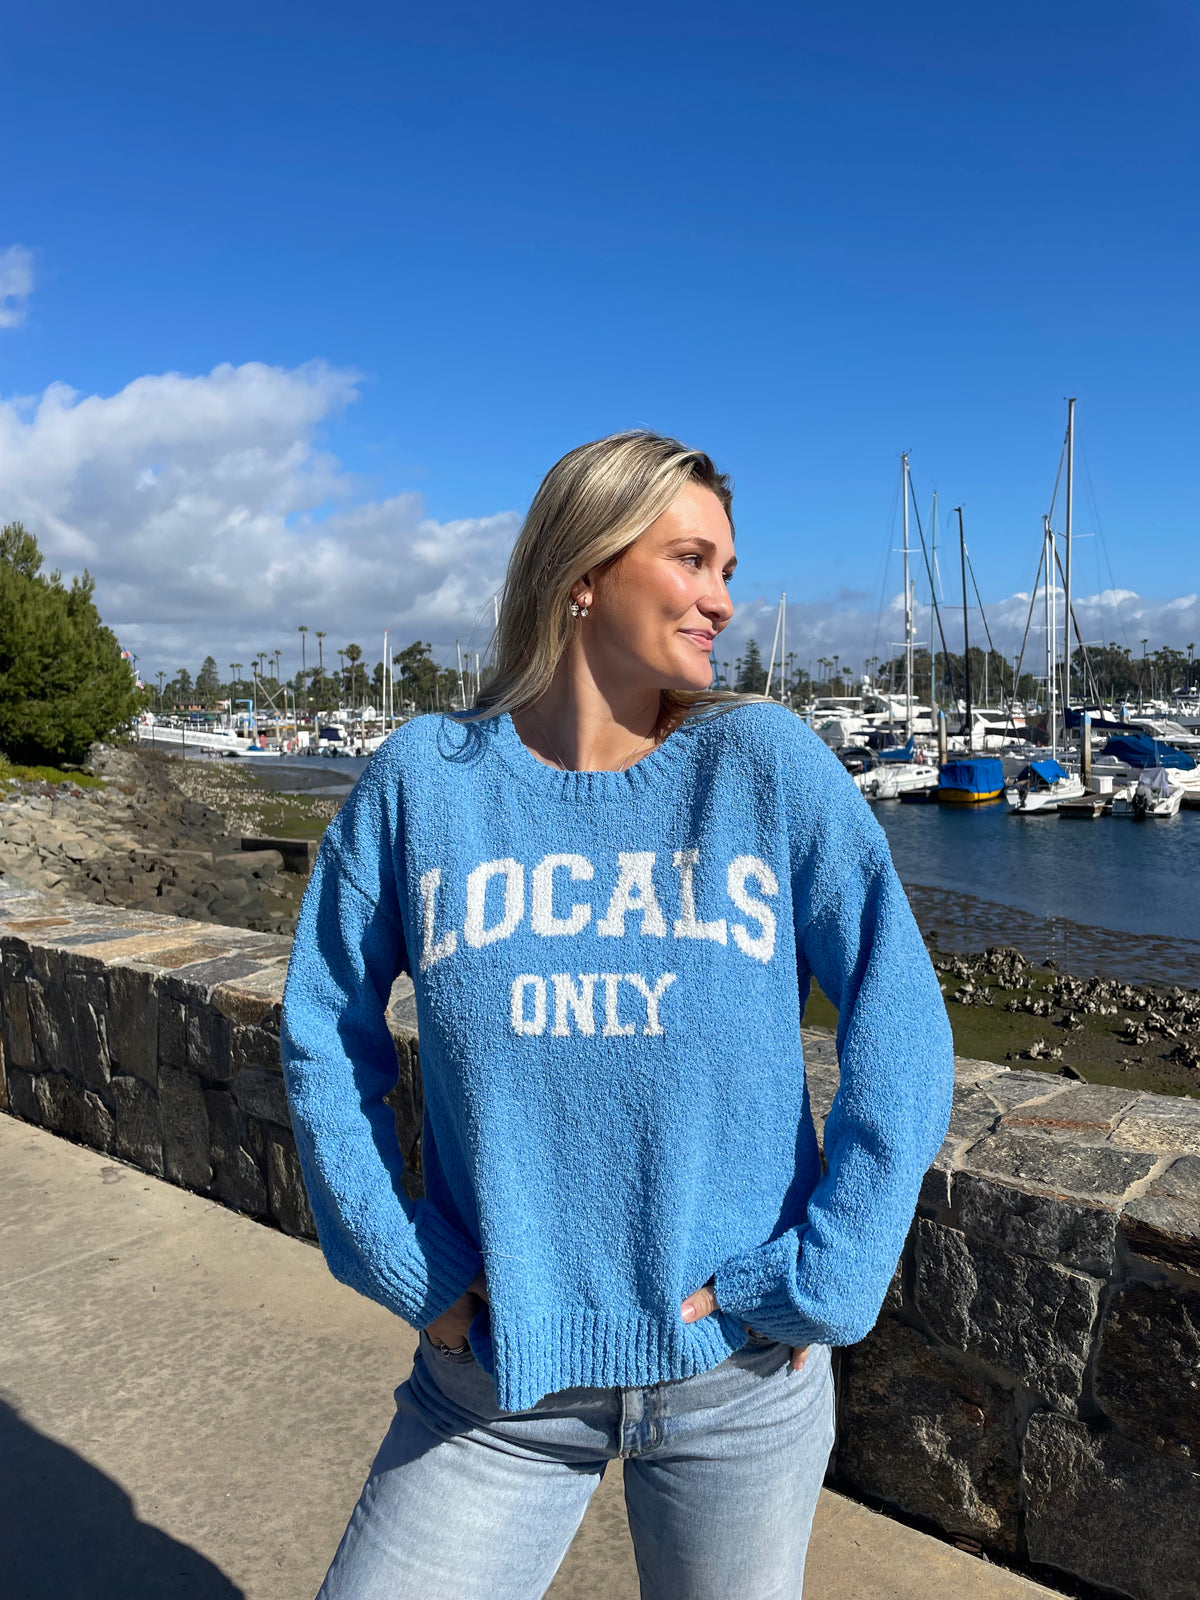 Locals Only Sweater